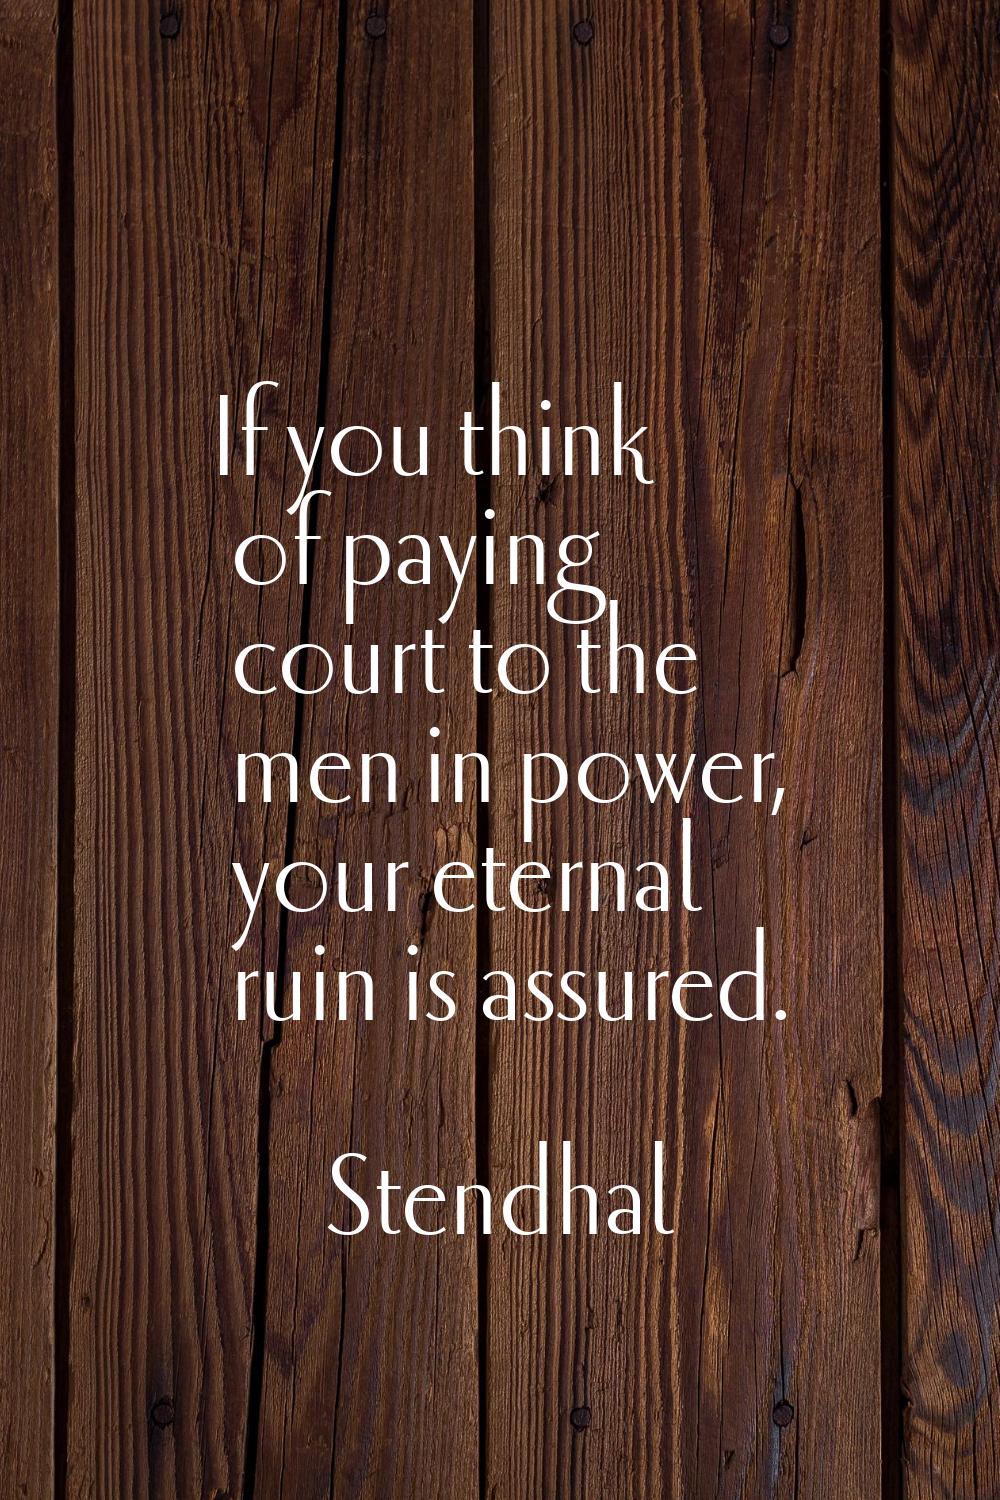 If you think of paying court to the men in power, your eternal ruin is assured.